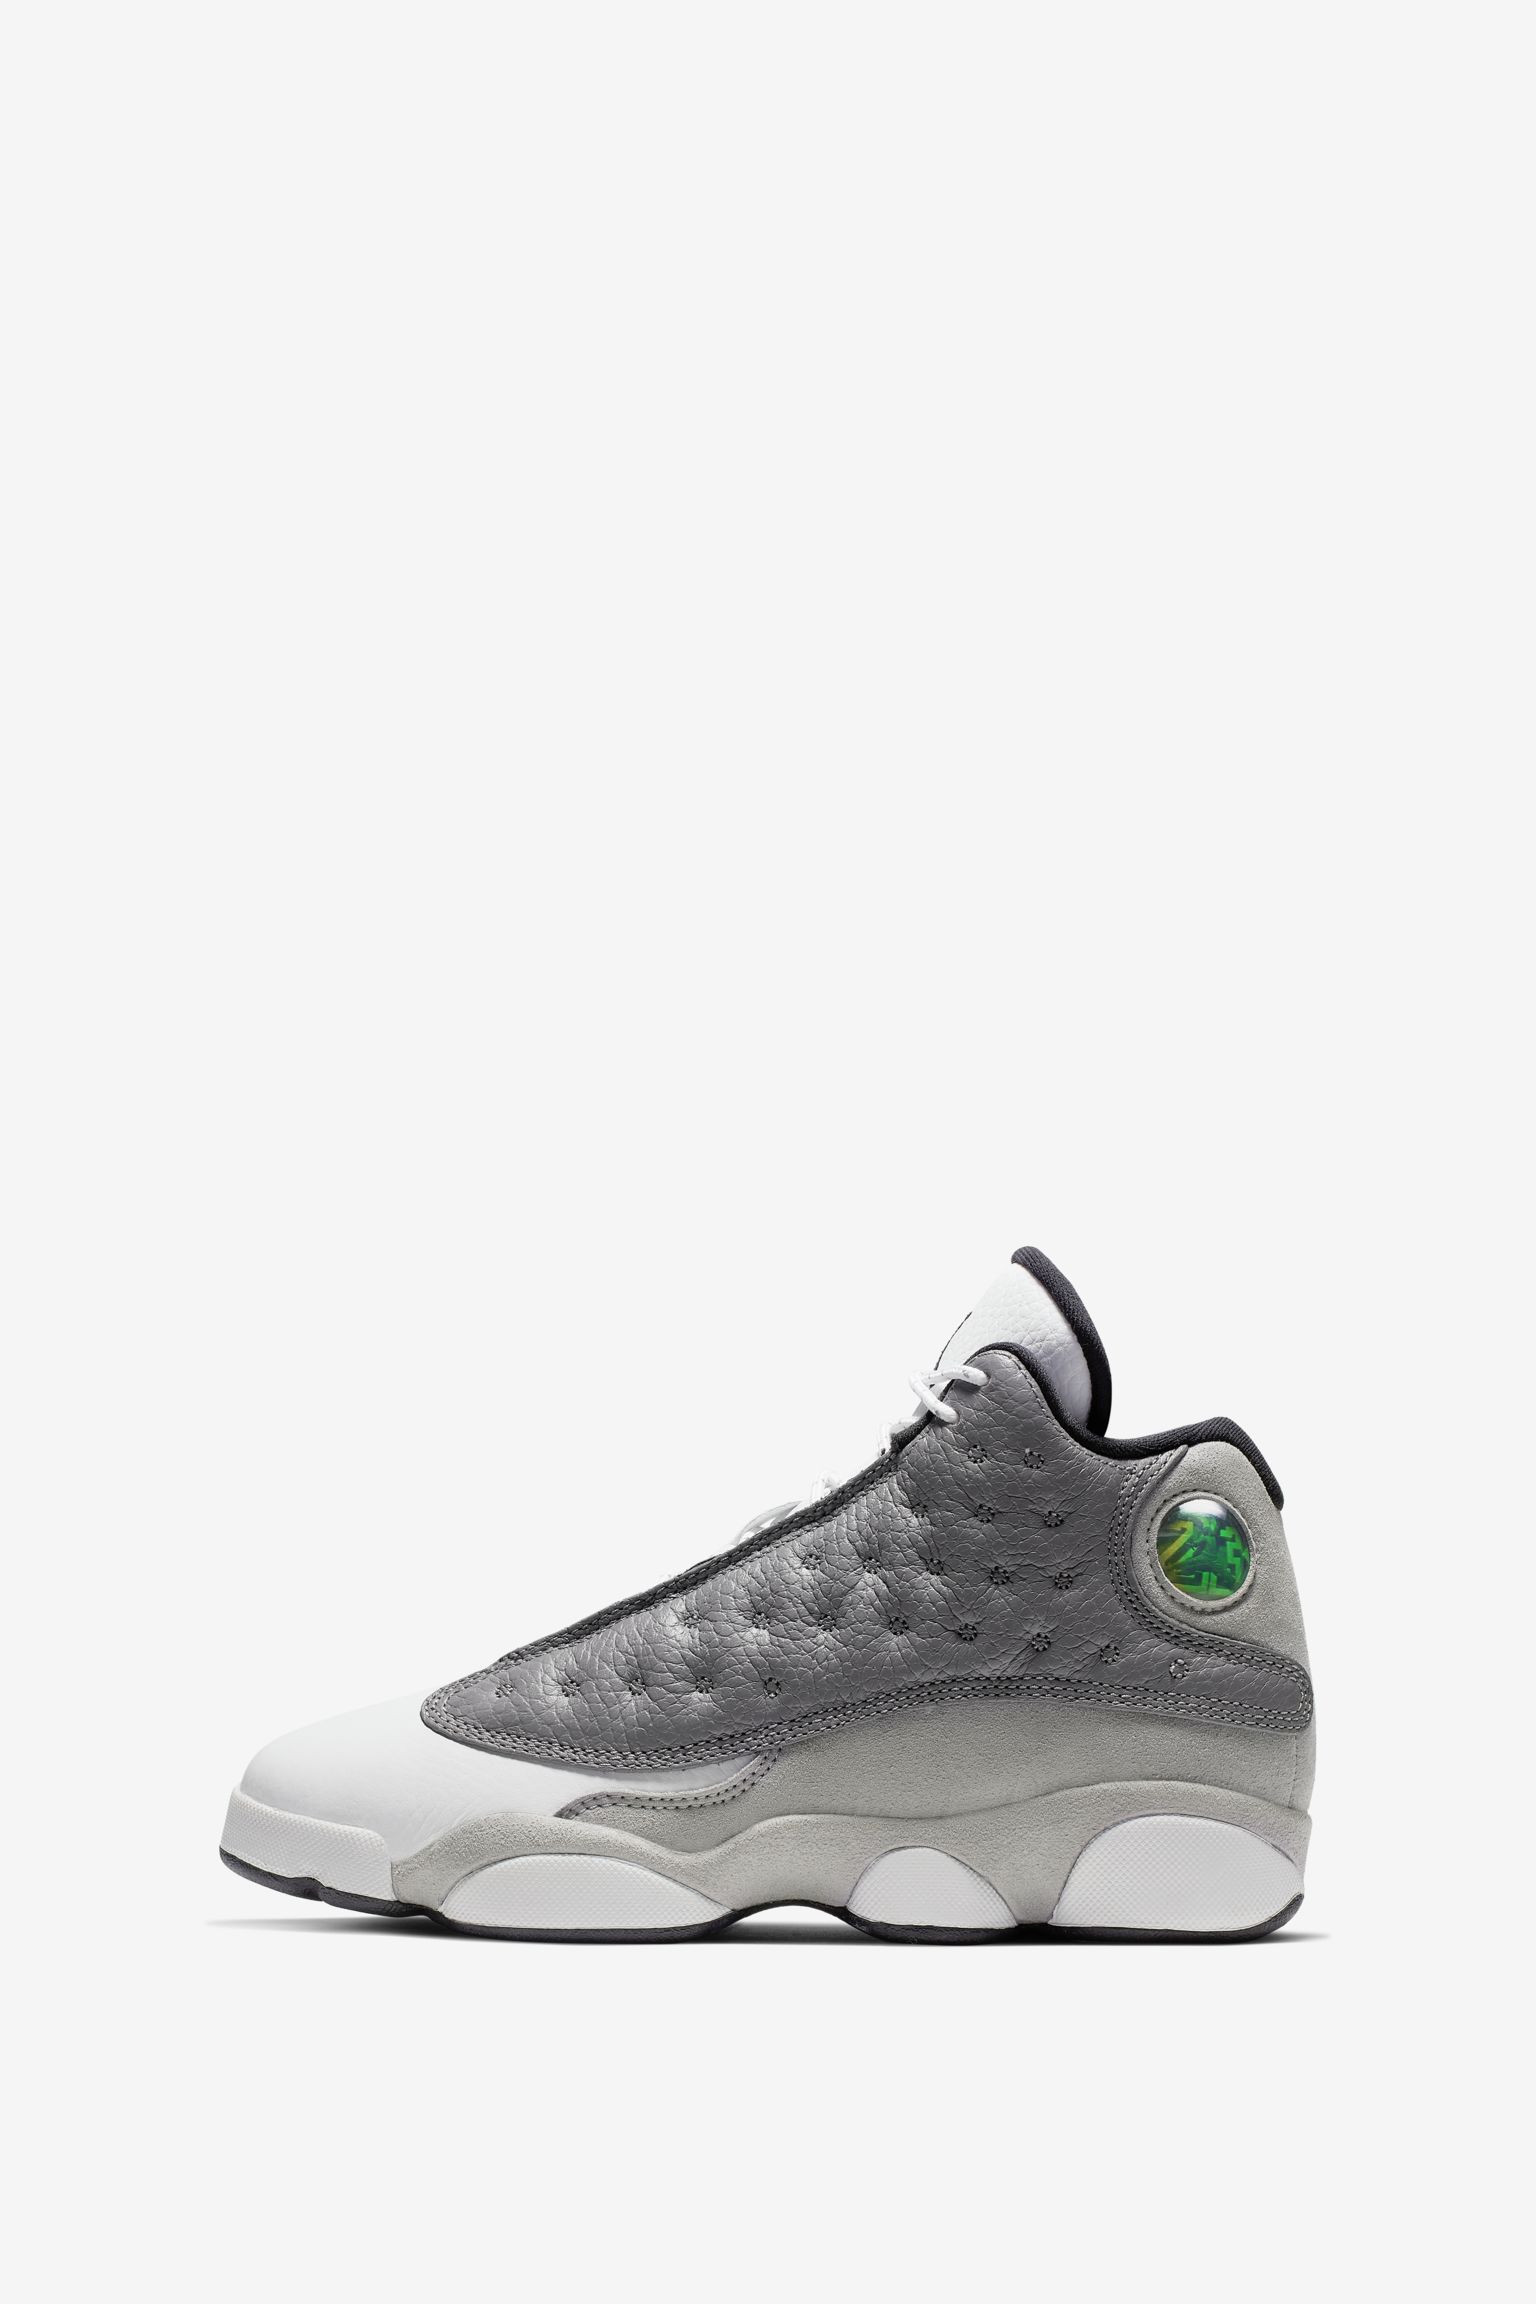 grey and white 13s